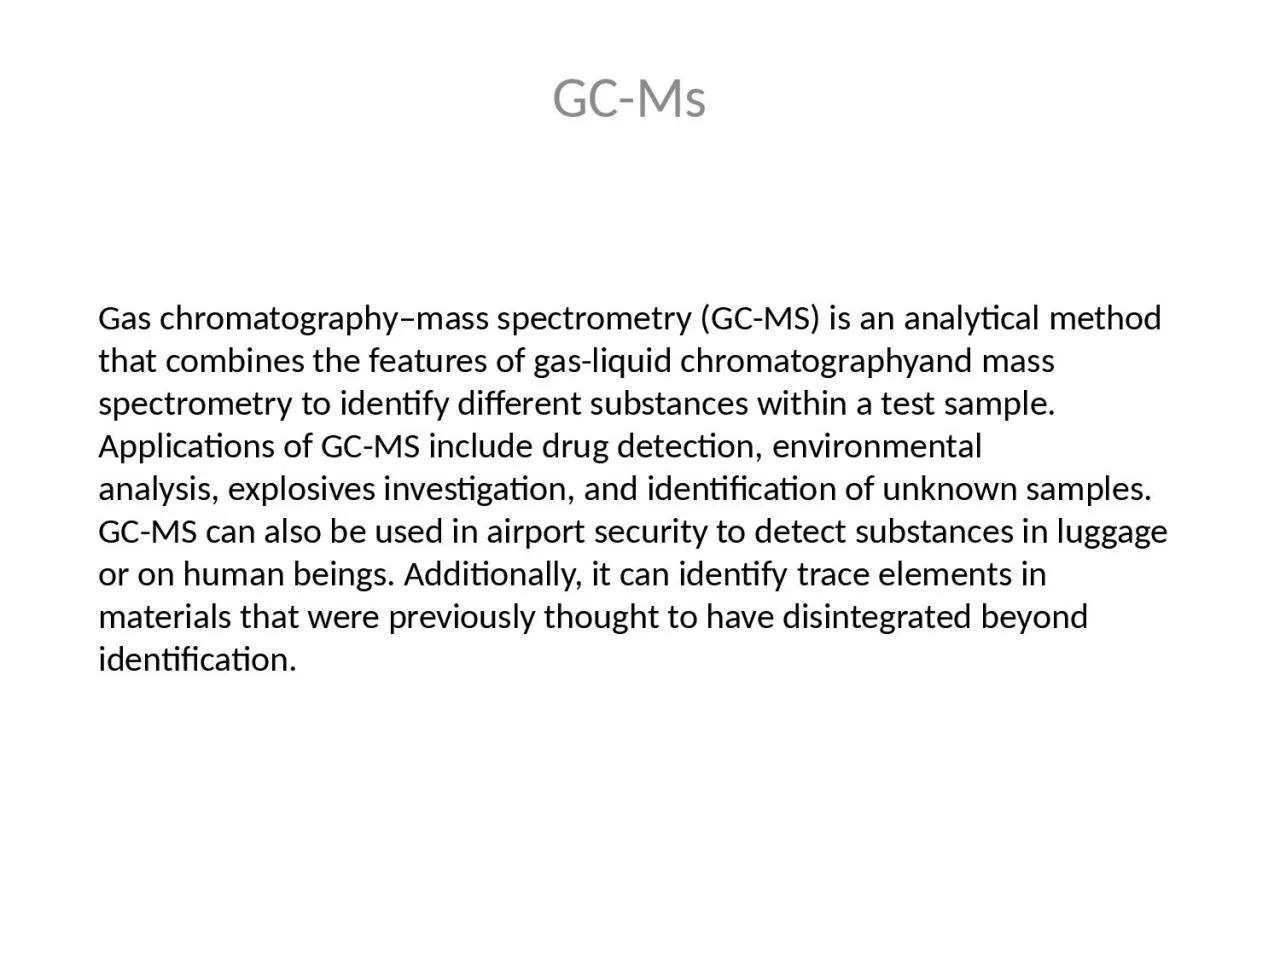 Gas chromatography–mass spectrometry (GC-MS) is an analytical method that combines